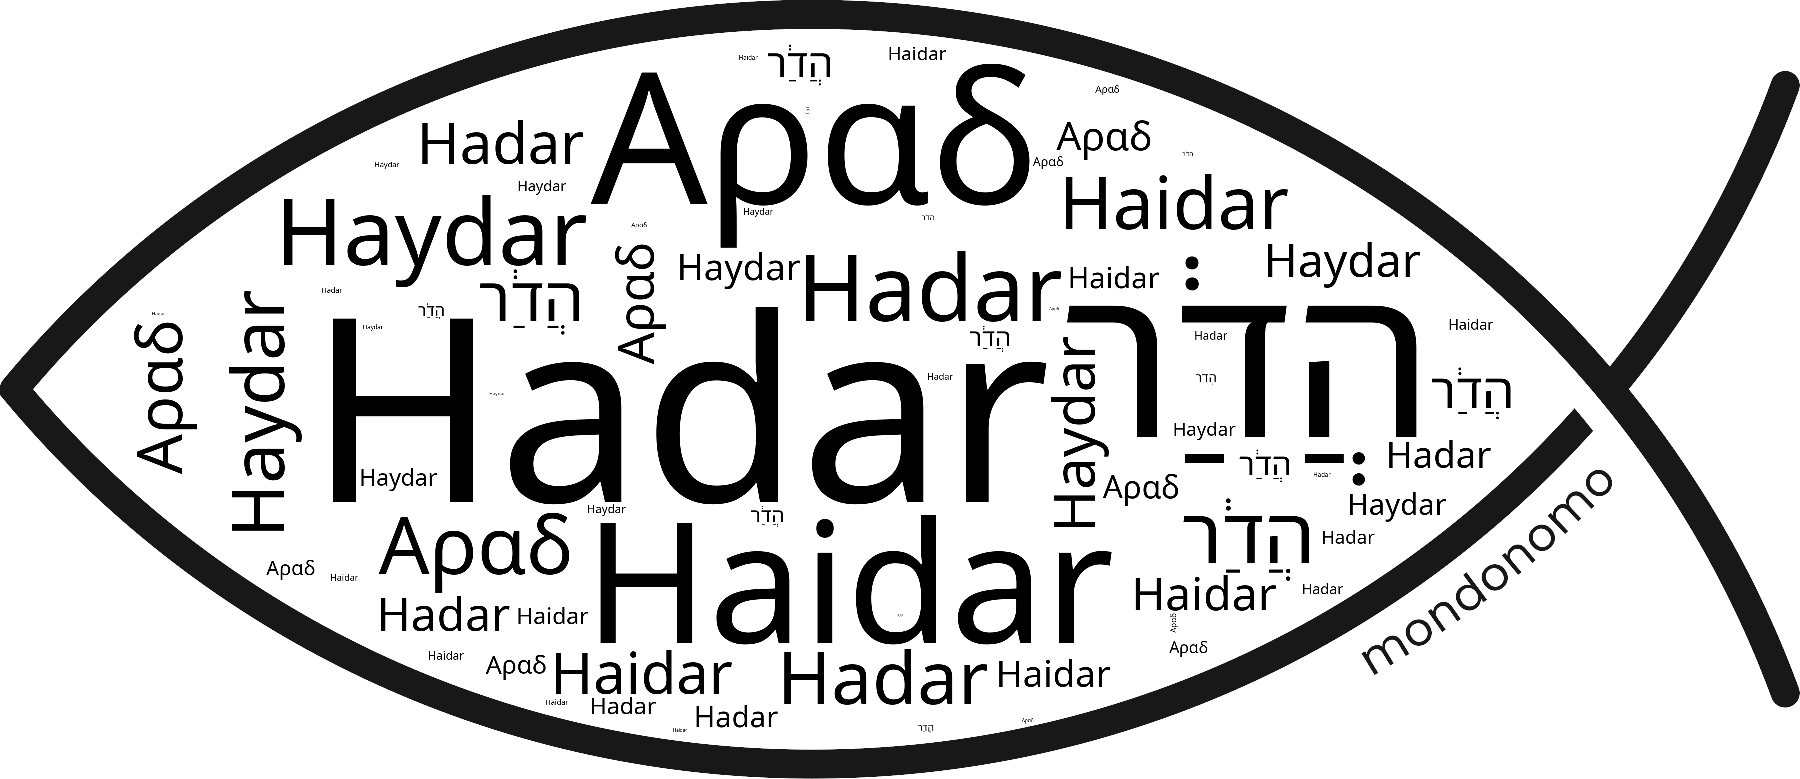 Name Hadar in the world's Bibles